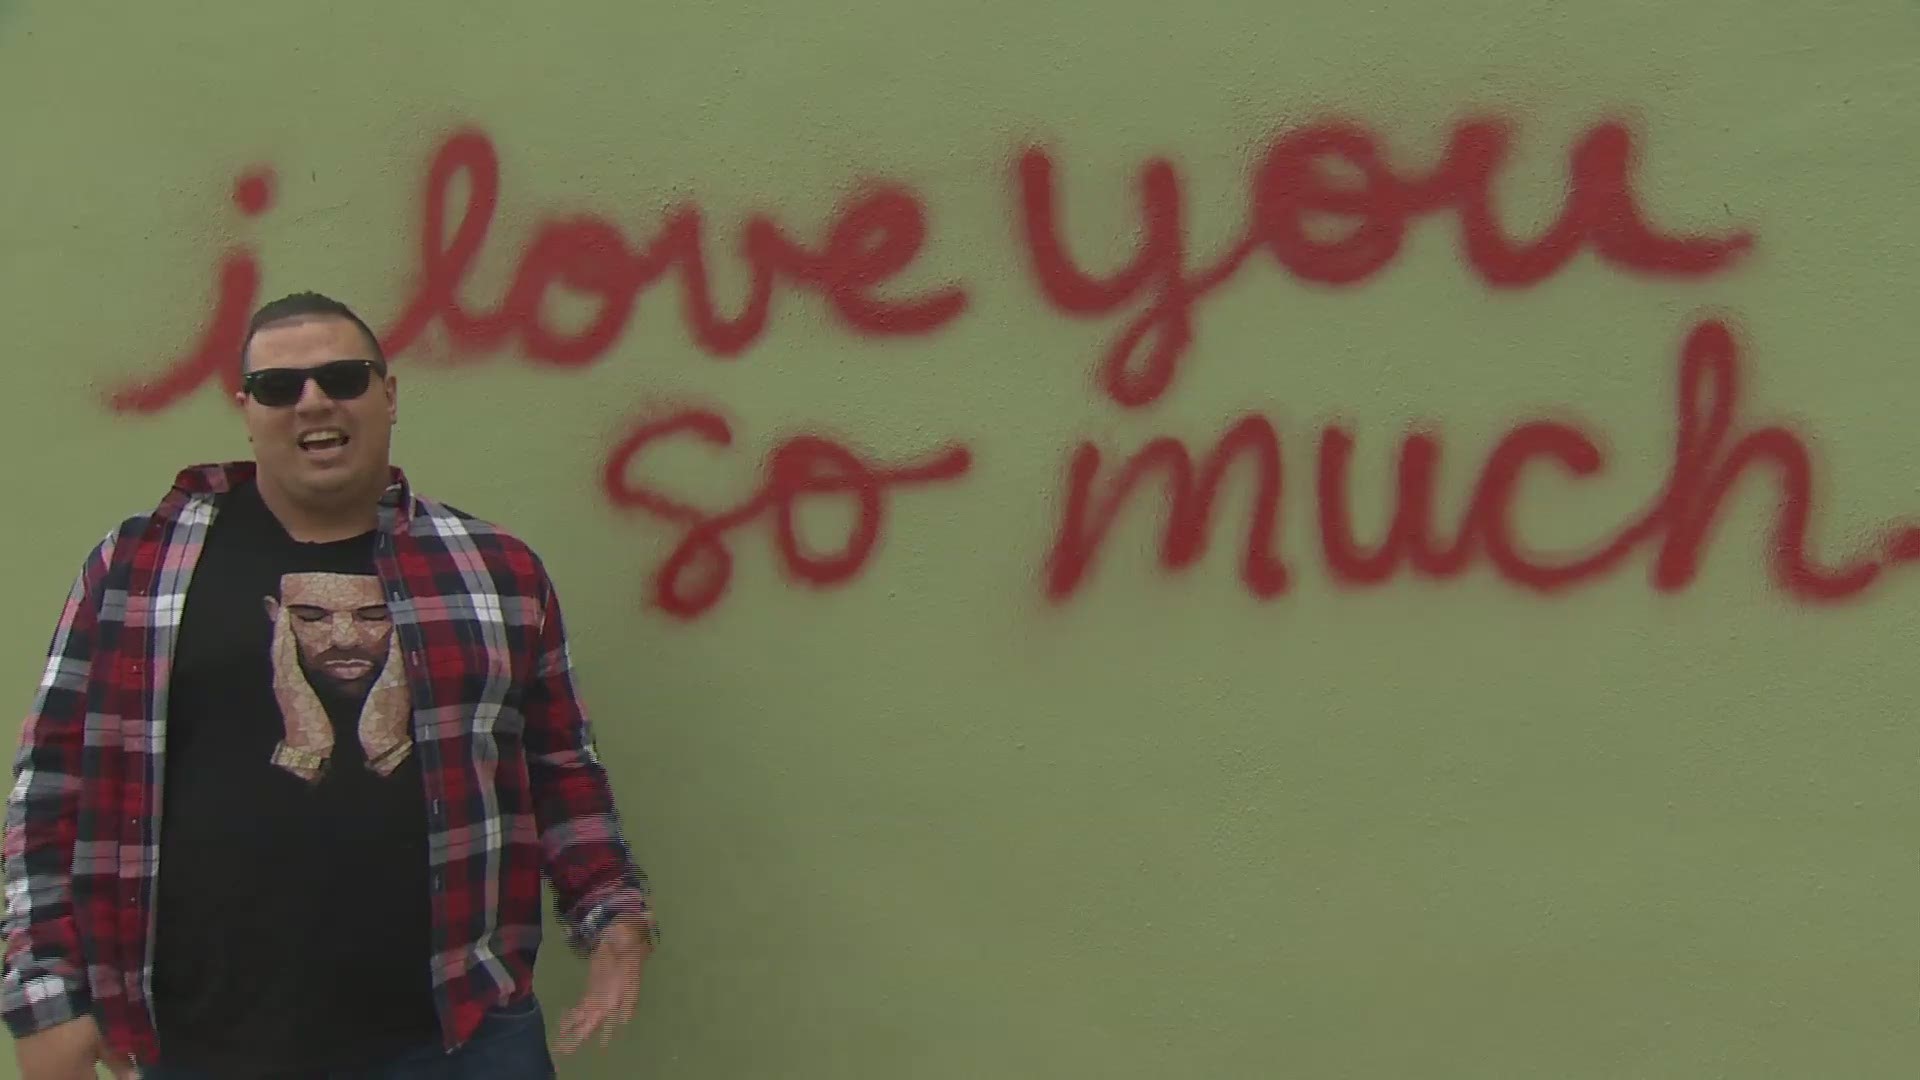 The 'I love you so much' wall